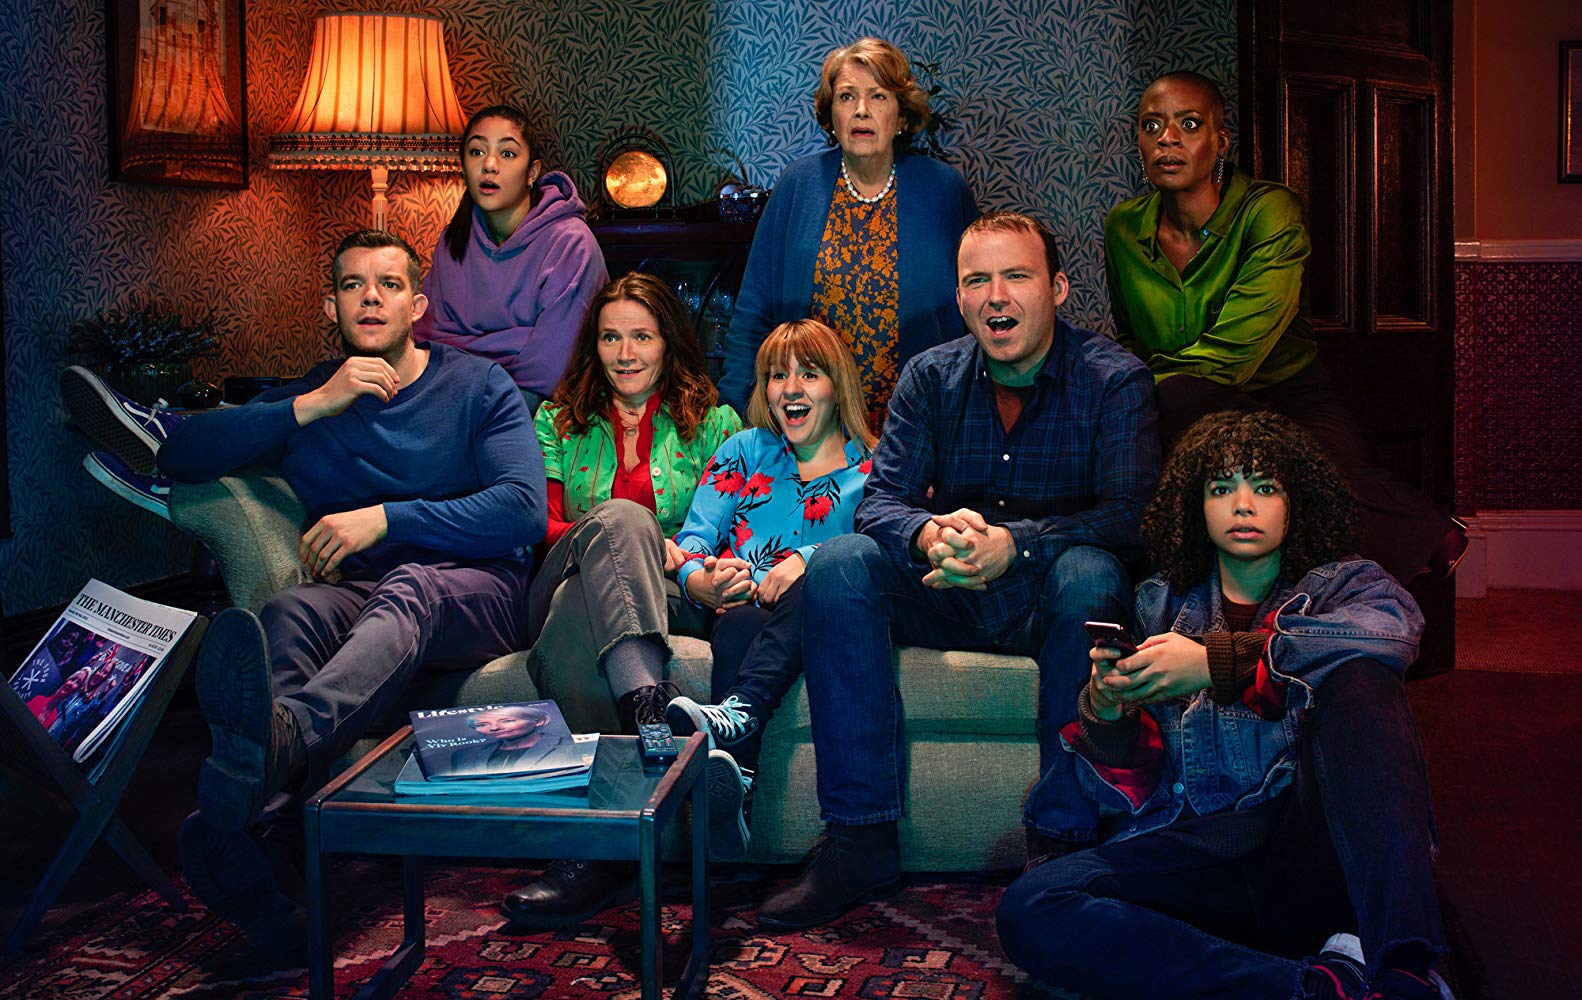 Promotional photo for Years and Years: the Lyons family sitting on a couch and watching TV